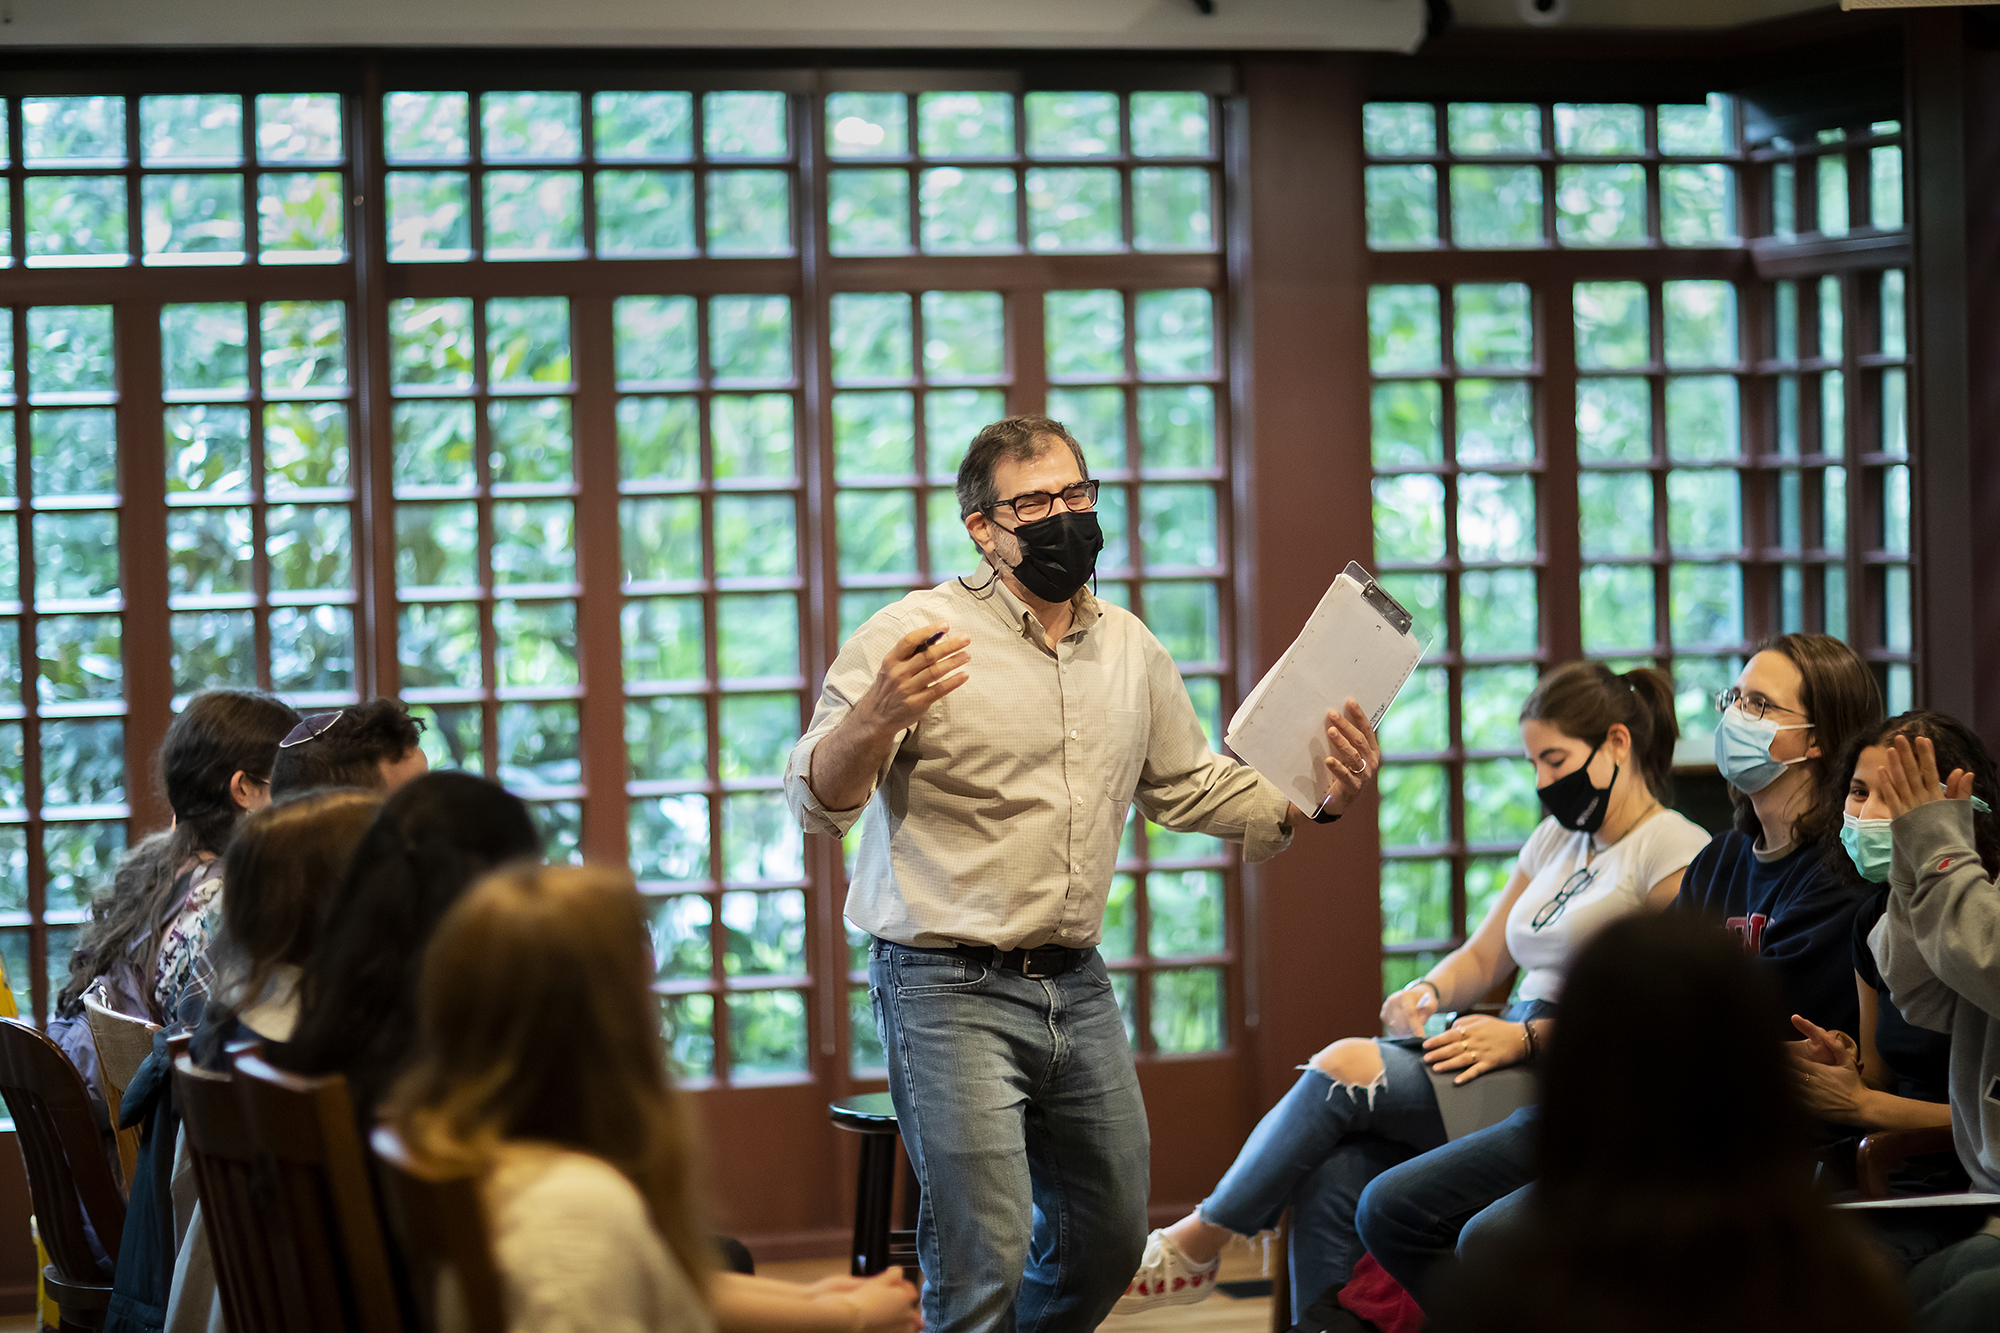 Al Filreis stands wearing a mask in a room full of students at the Kelly Writers House.